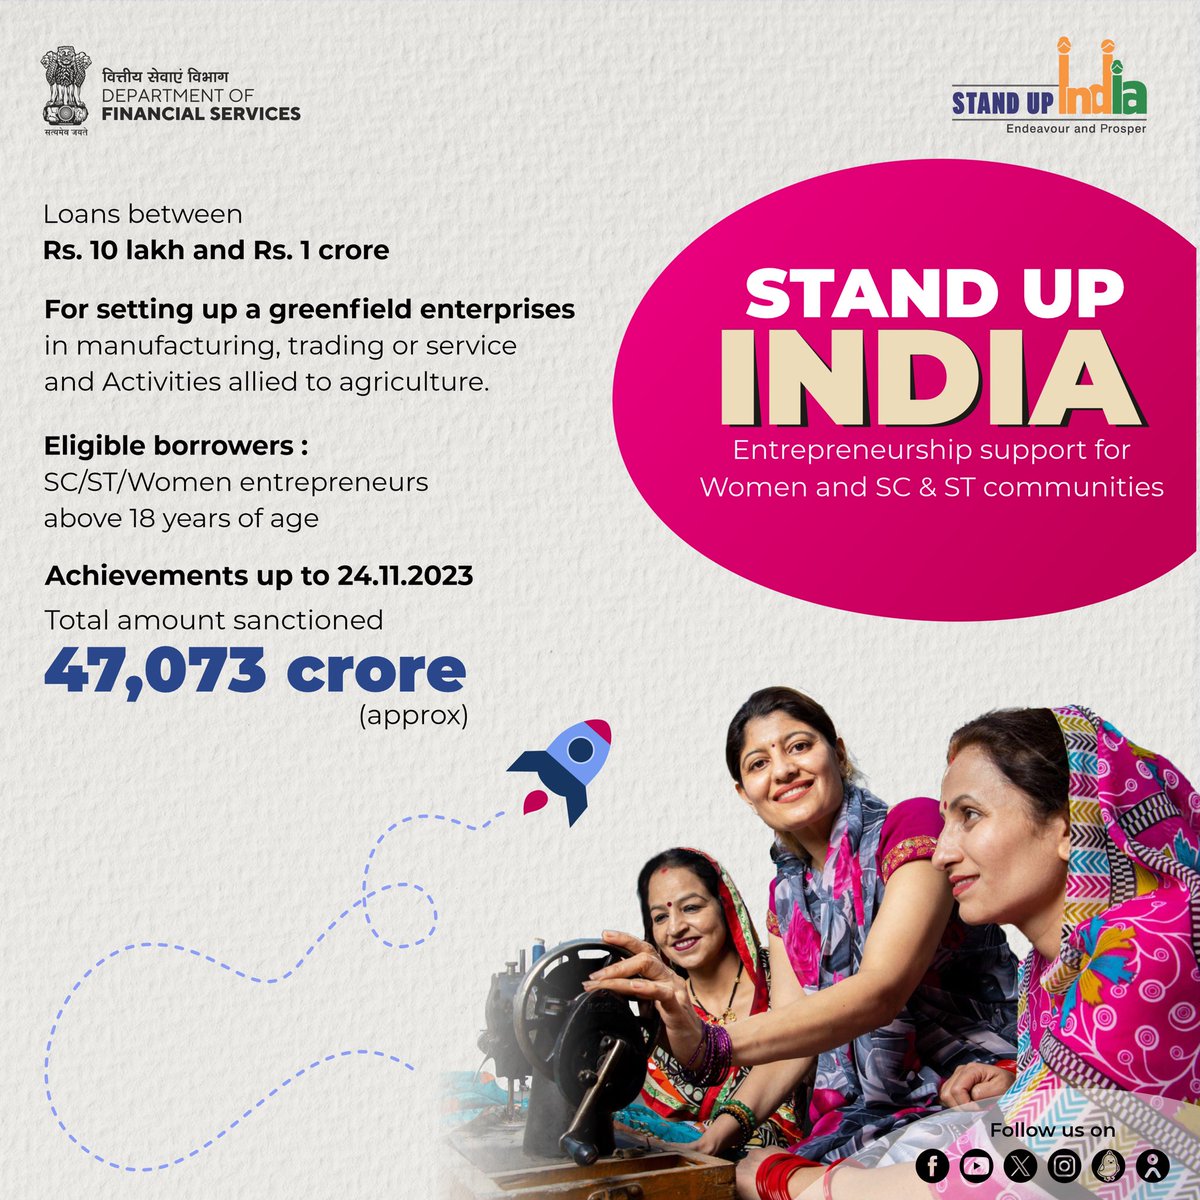 The success of the #StandUpIndia scheme in promoting entrepreneurship is reflected in terms of extending loans of over ₹47,000 crore to SC, ST, and Women entrepreneurs.

#ViksitBharat 
#FinMinReview2023